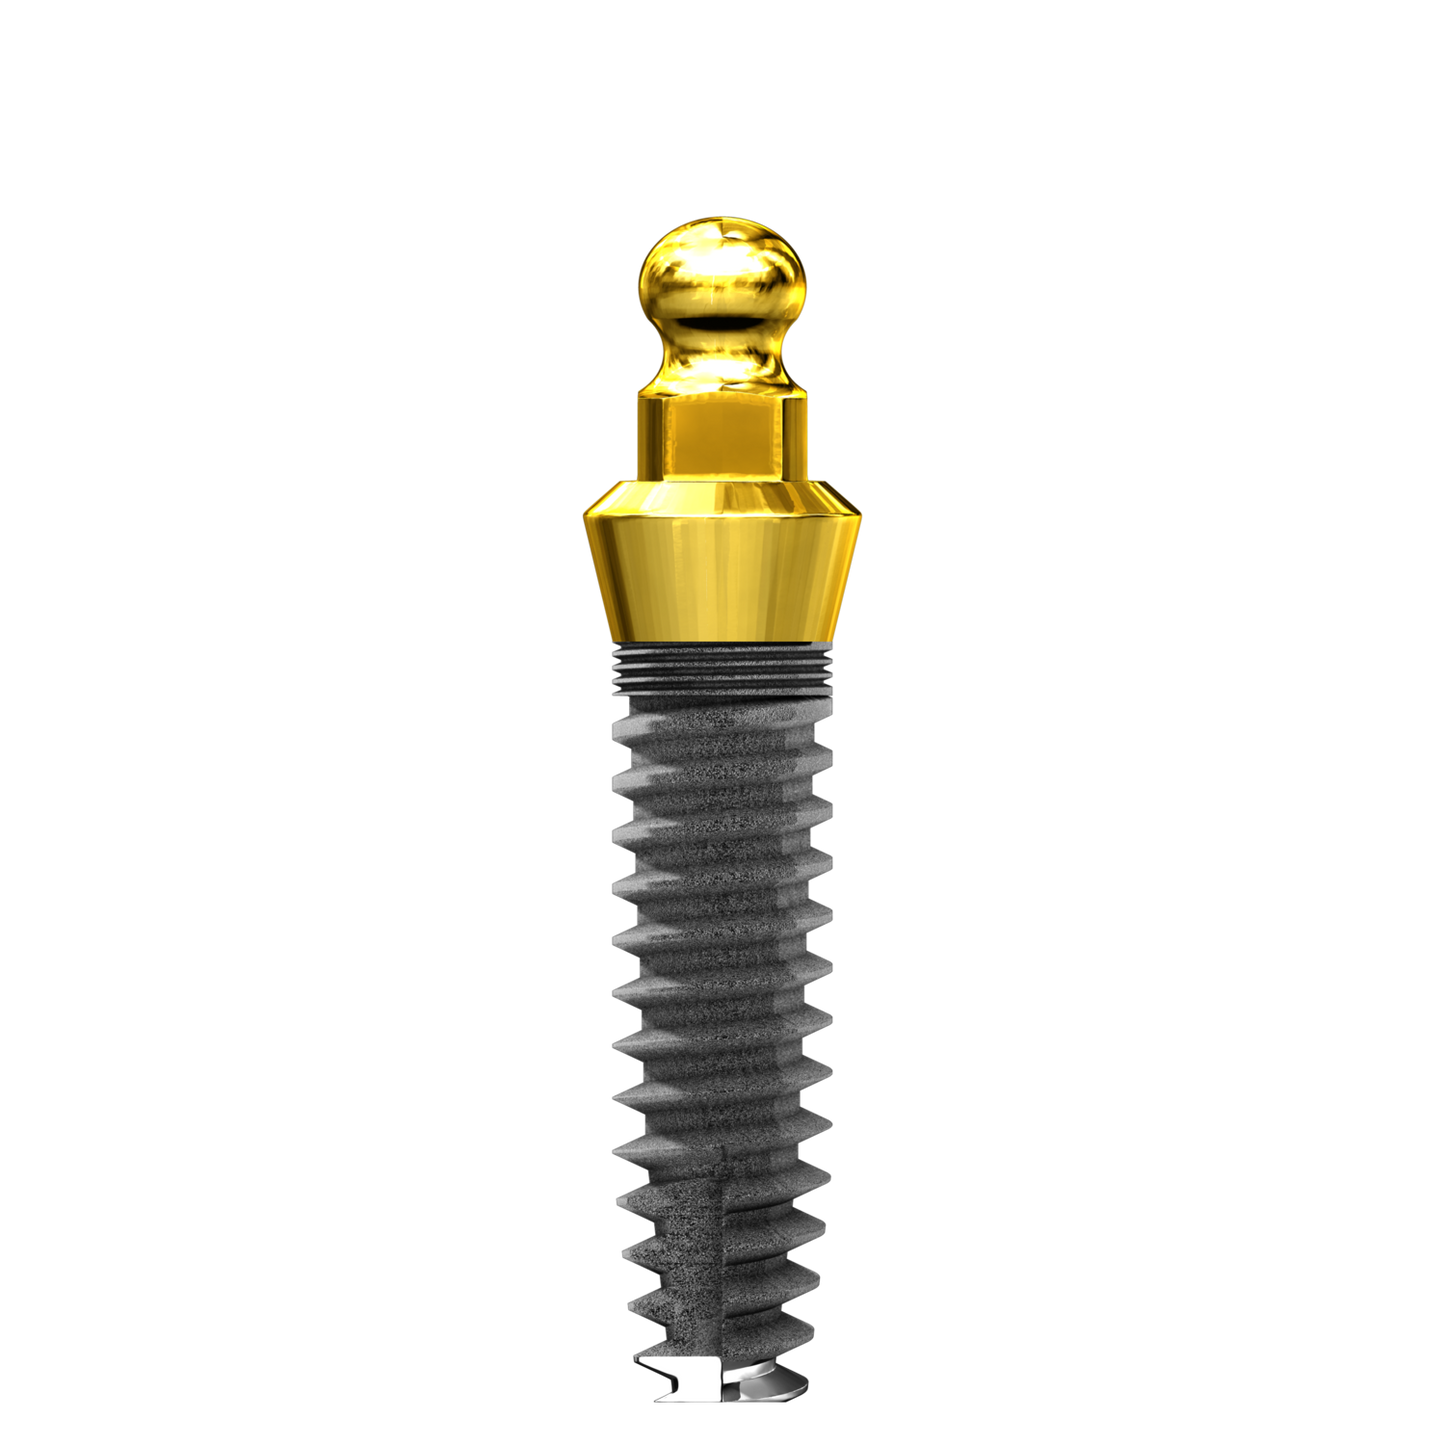 4.0mm x 14mm ISI C&B One Piece Implant